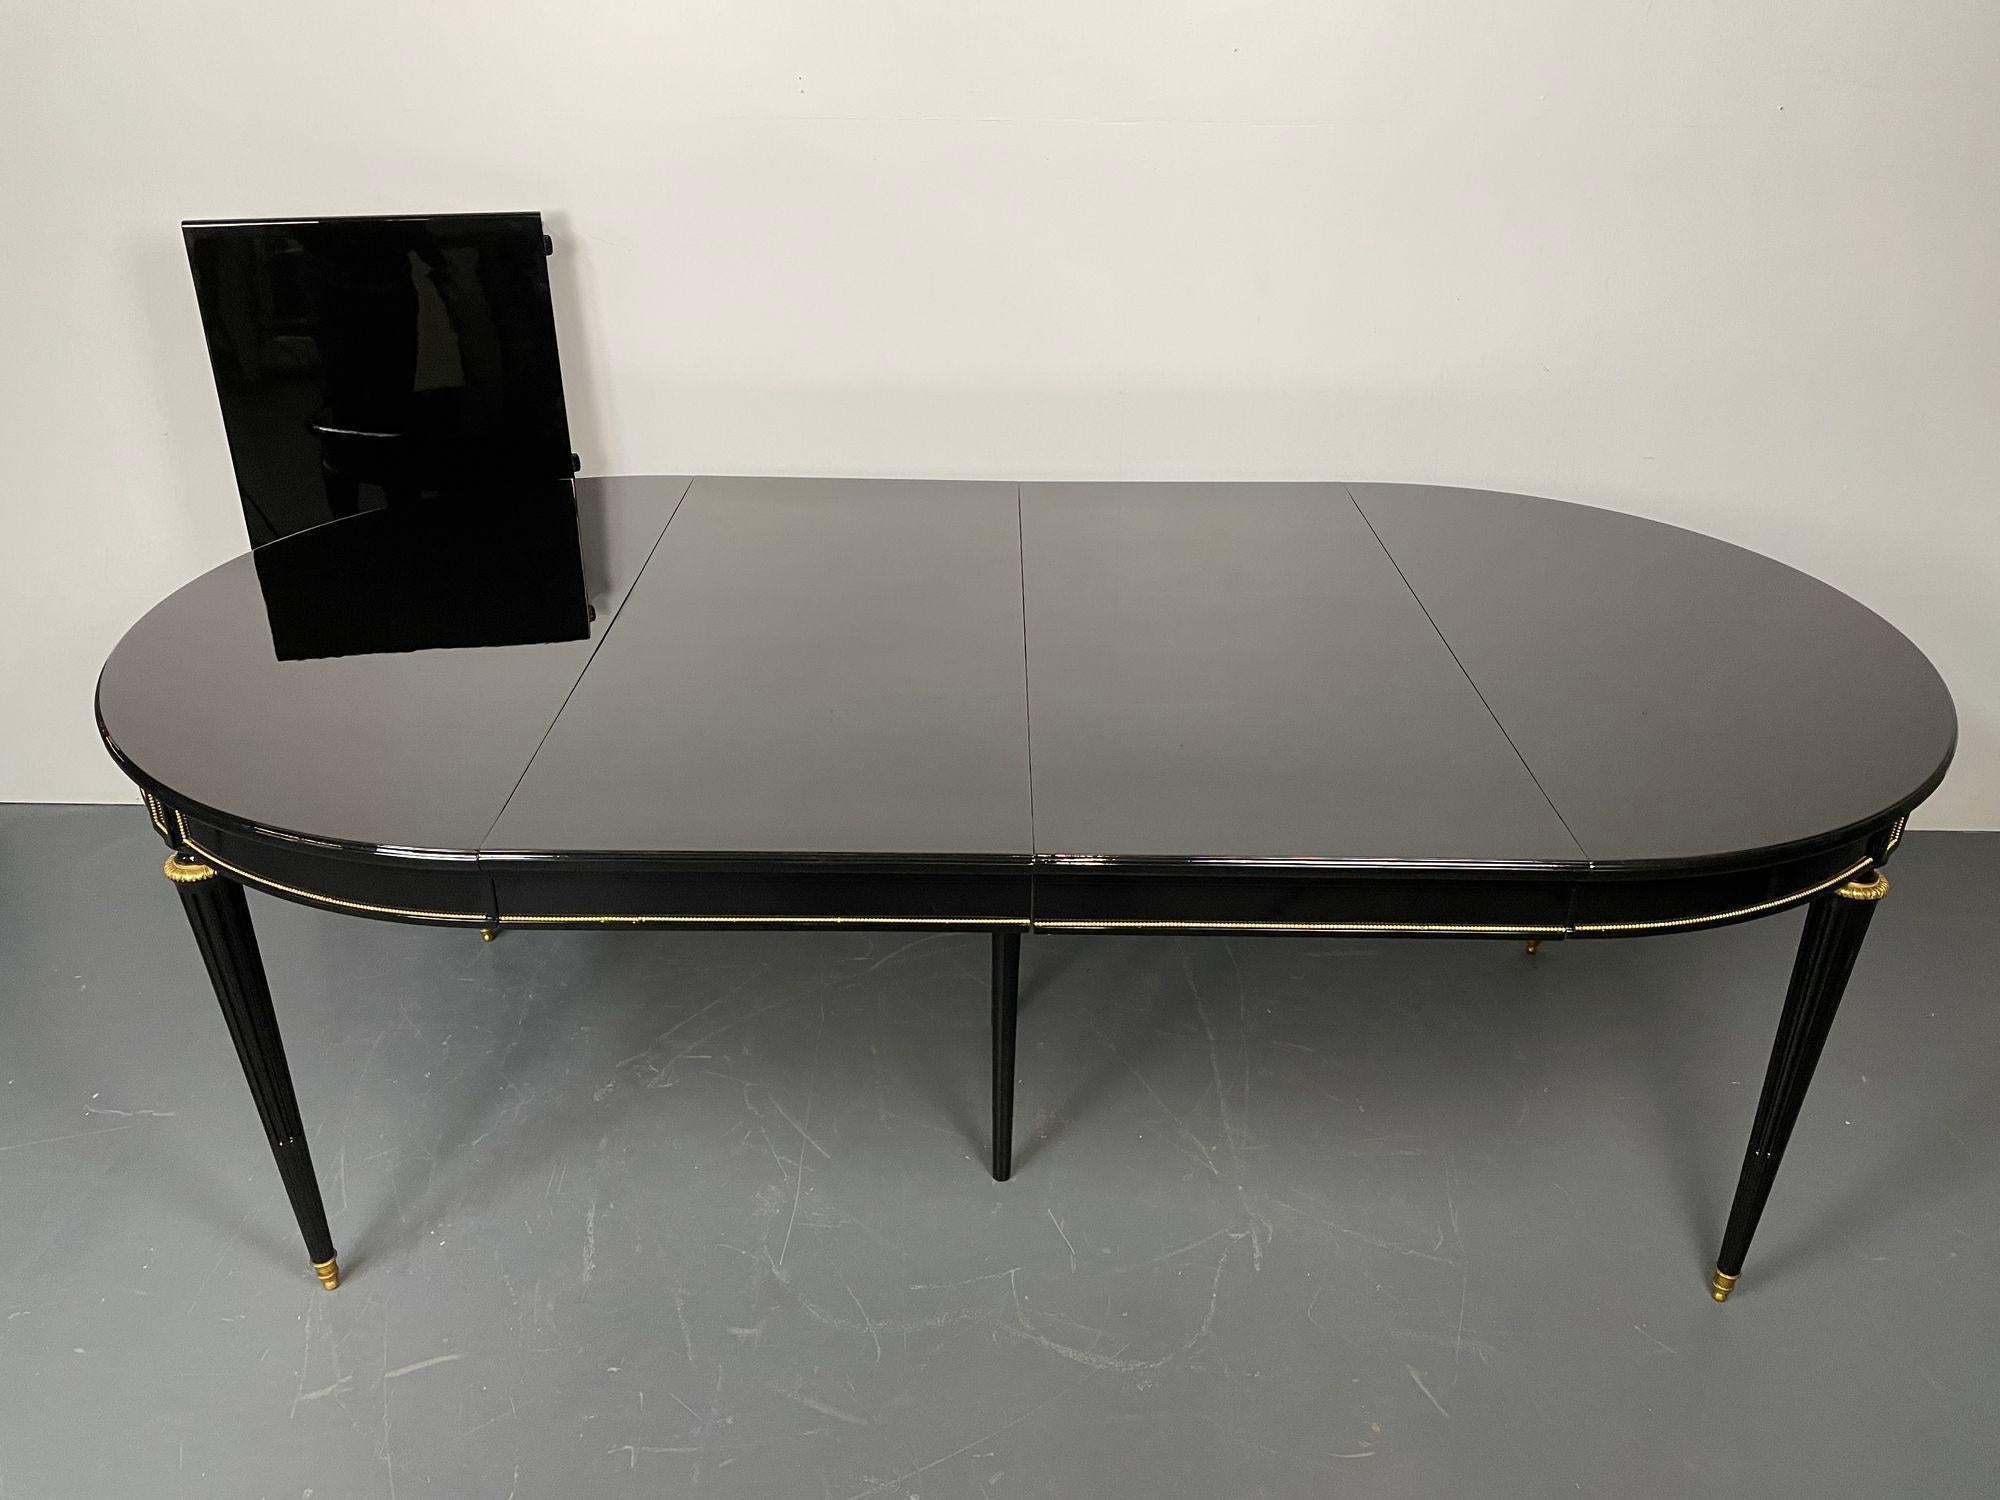 Maison Gouffé Hollywood Regency Dining Table, Ebony Lacquer, Bronze, Paris 1930s In Good Condition For Sale In Stamford, CT